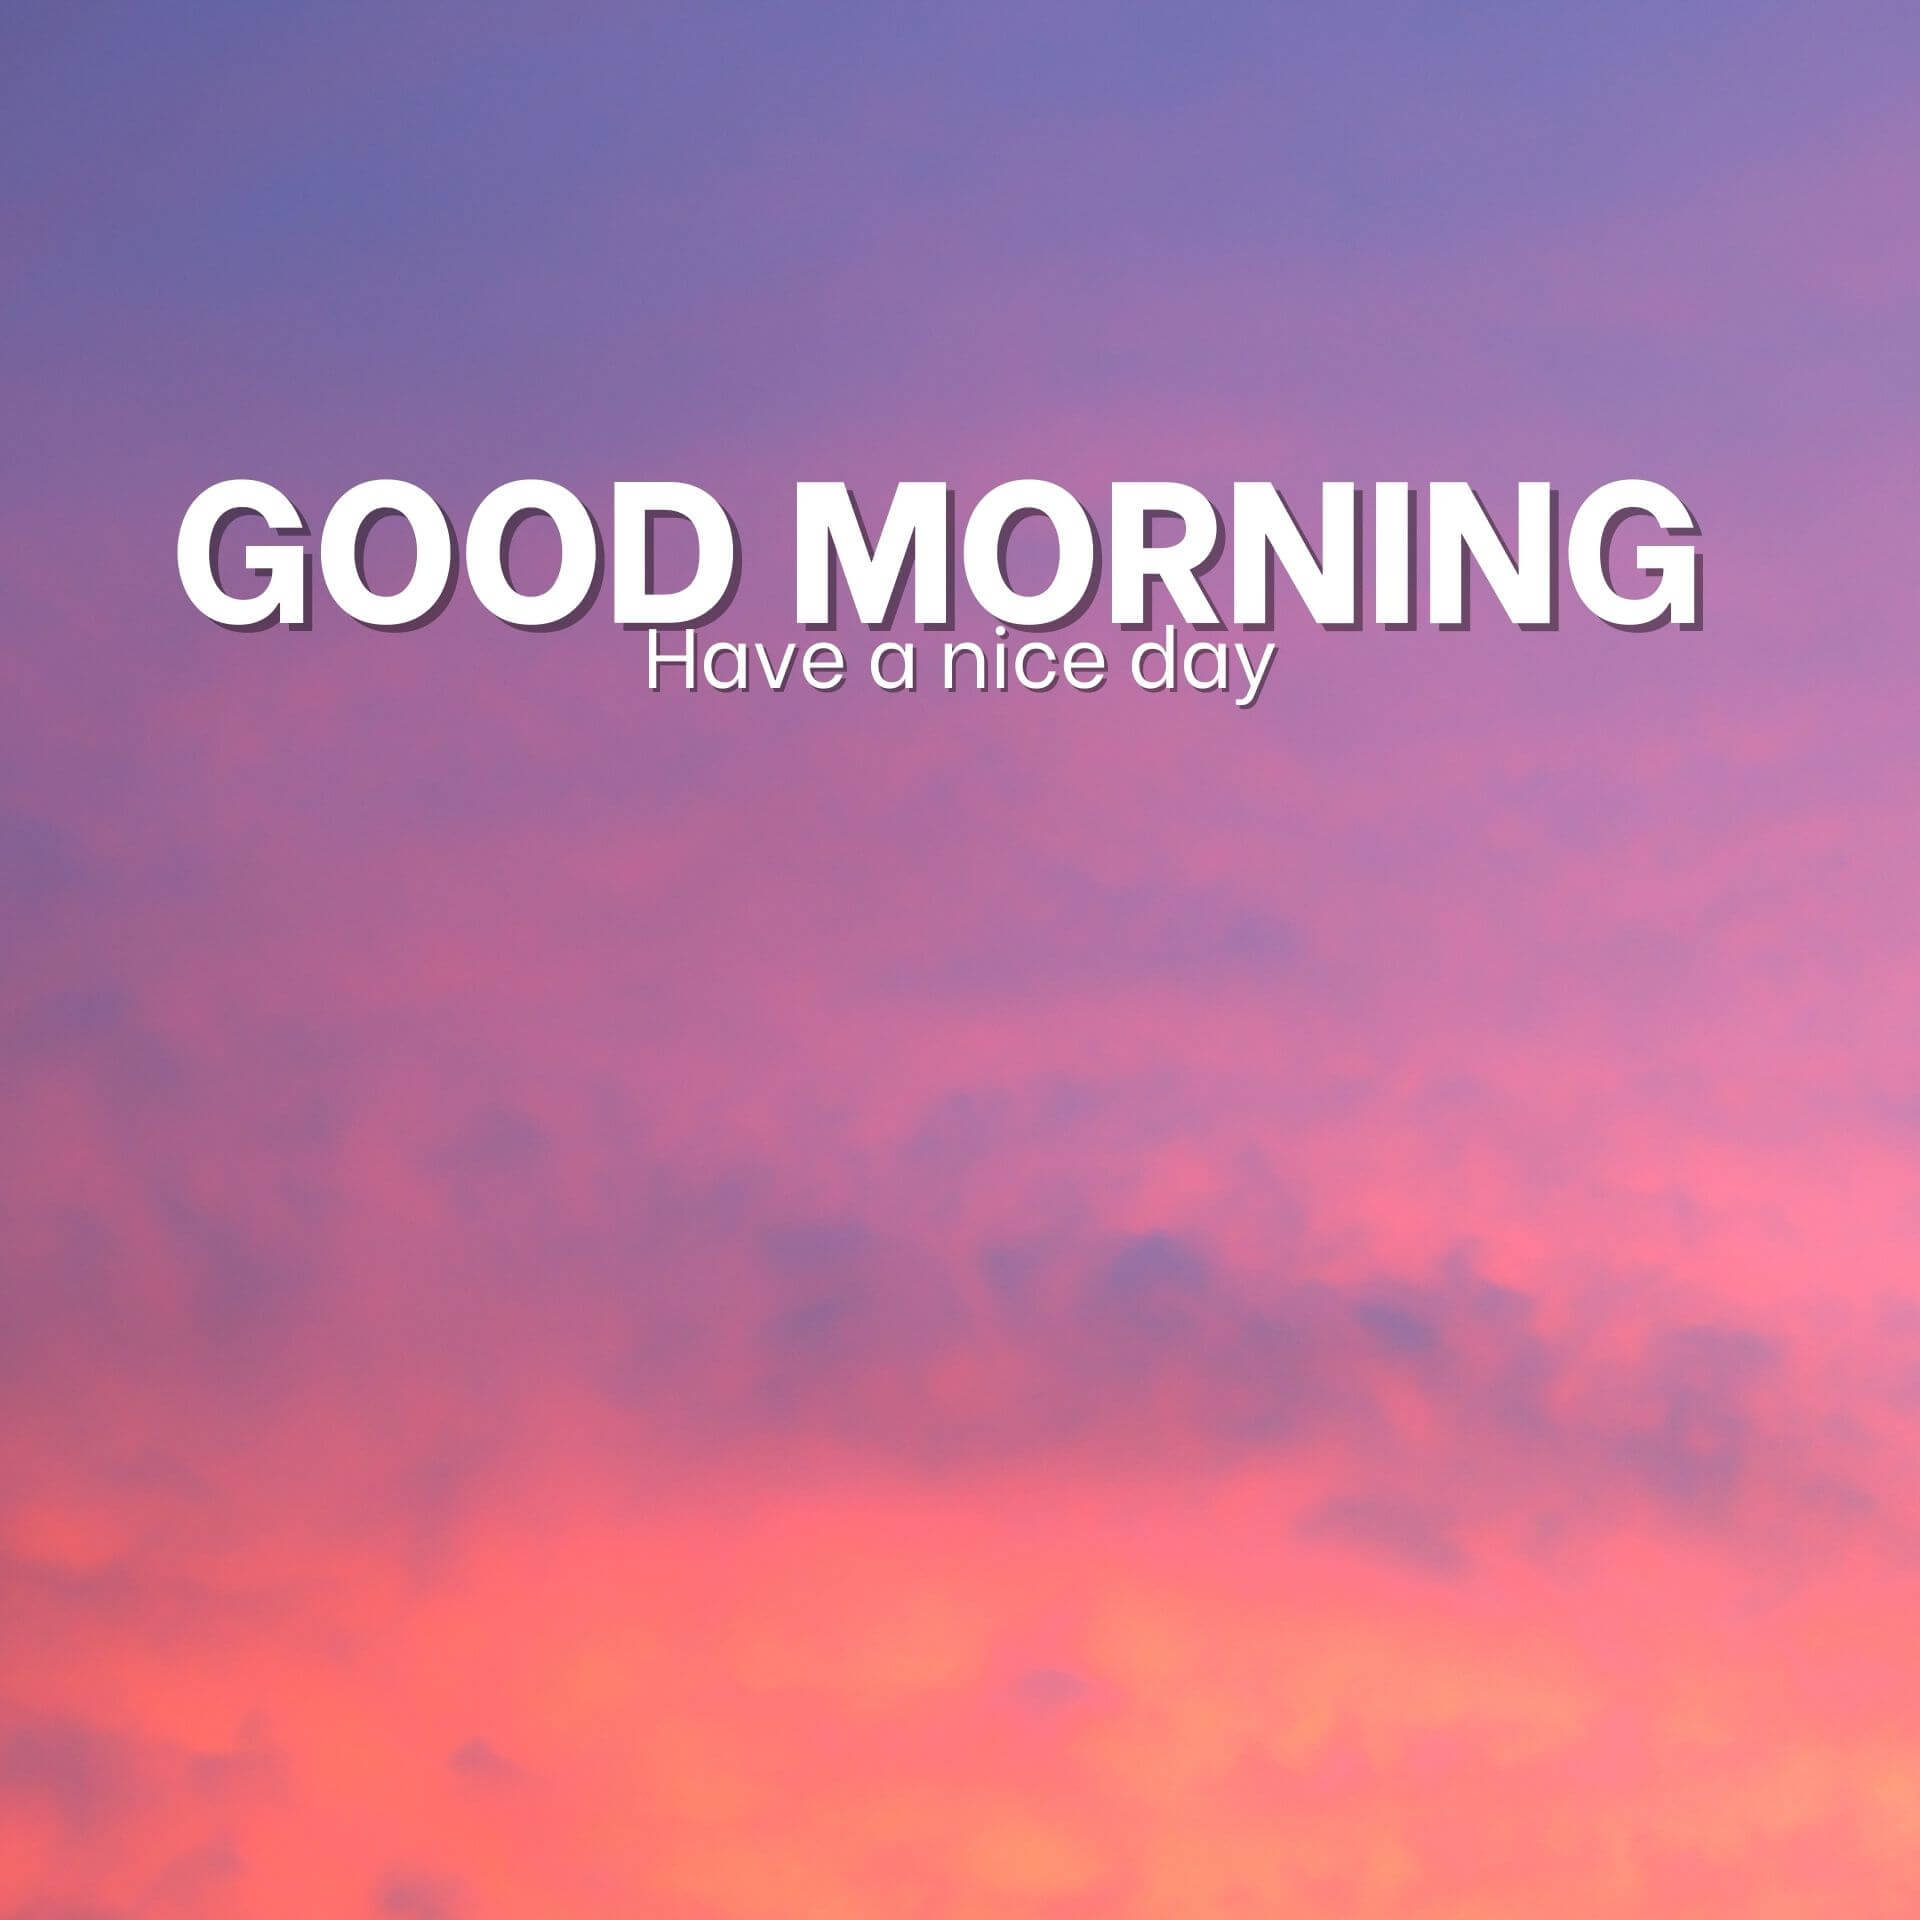 Good morning have a nice day Photo Free Download